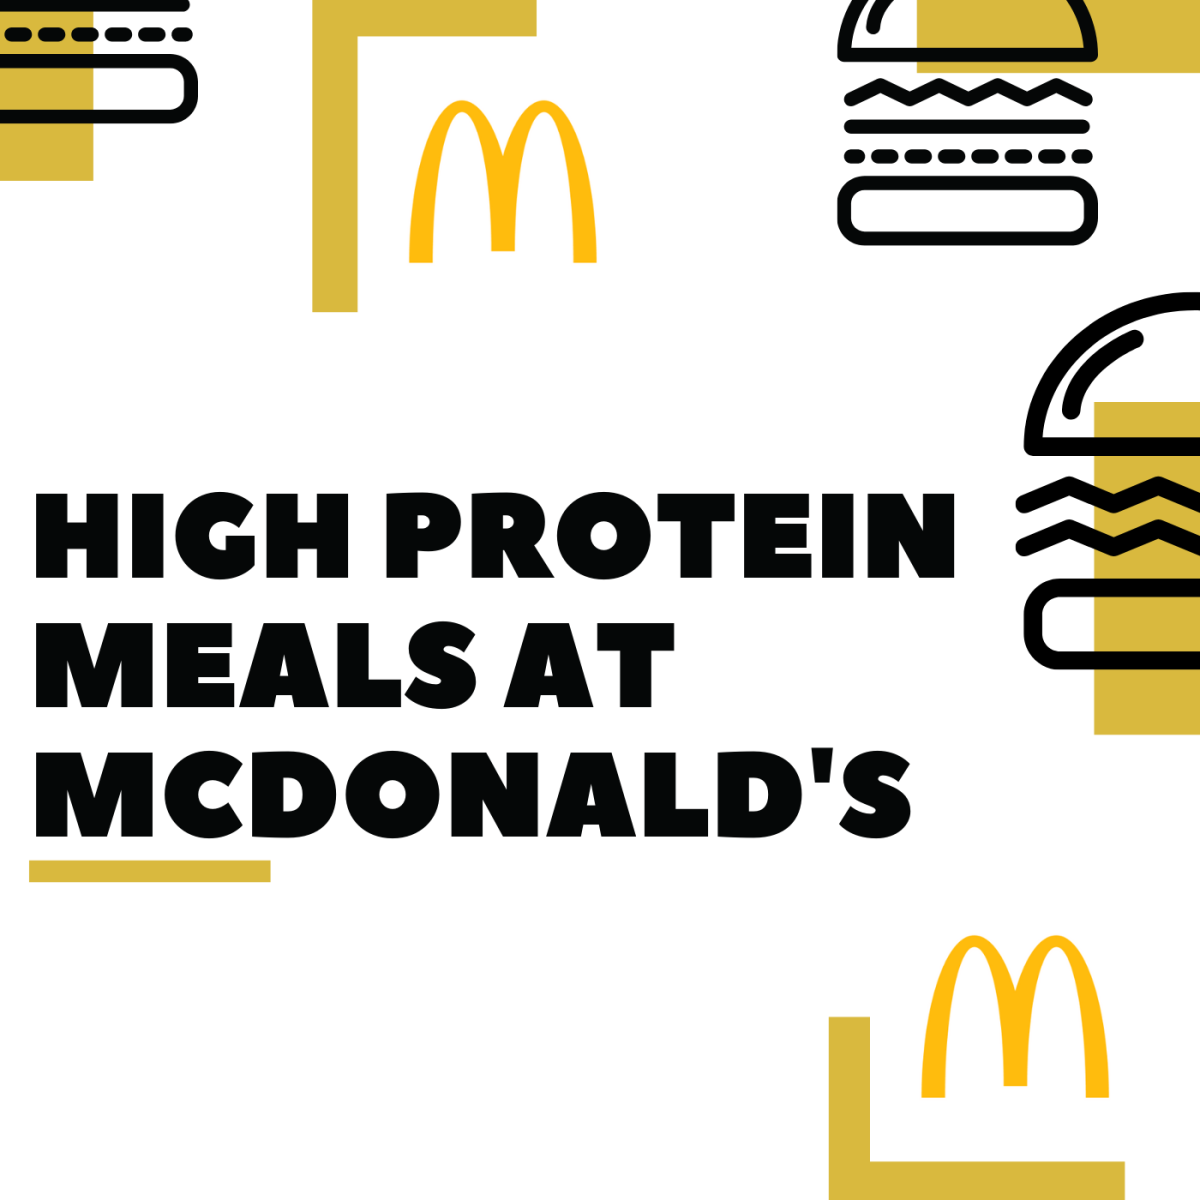 Healthy and High Protein Meals at McDonald's